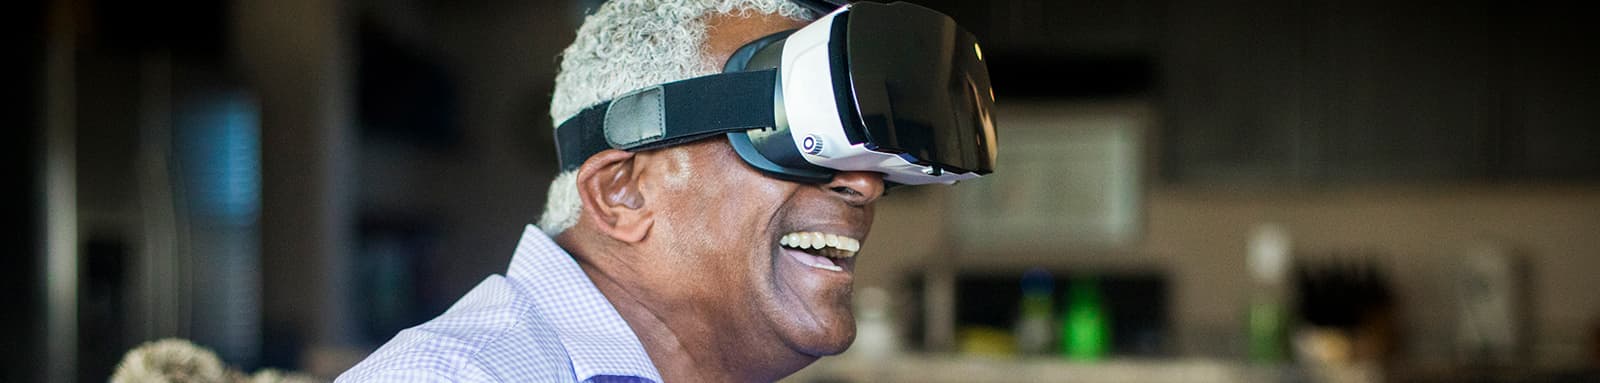 Smiling man with virtual reality glasses